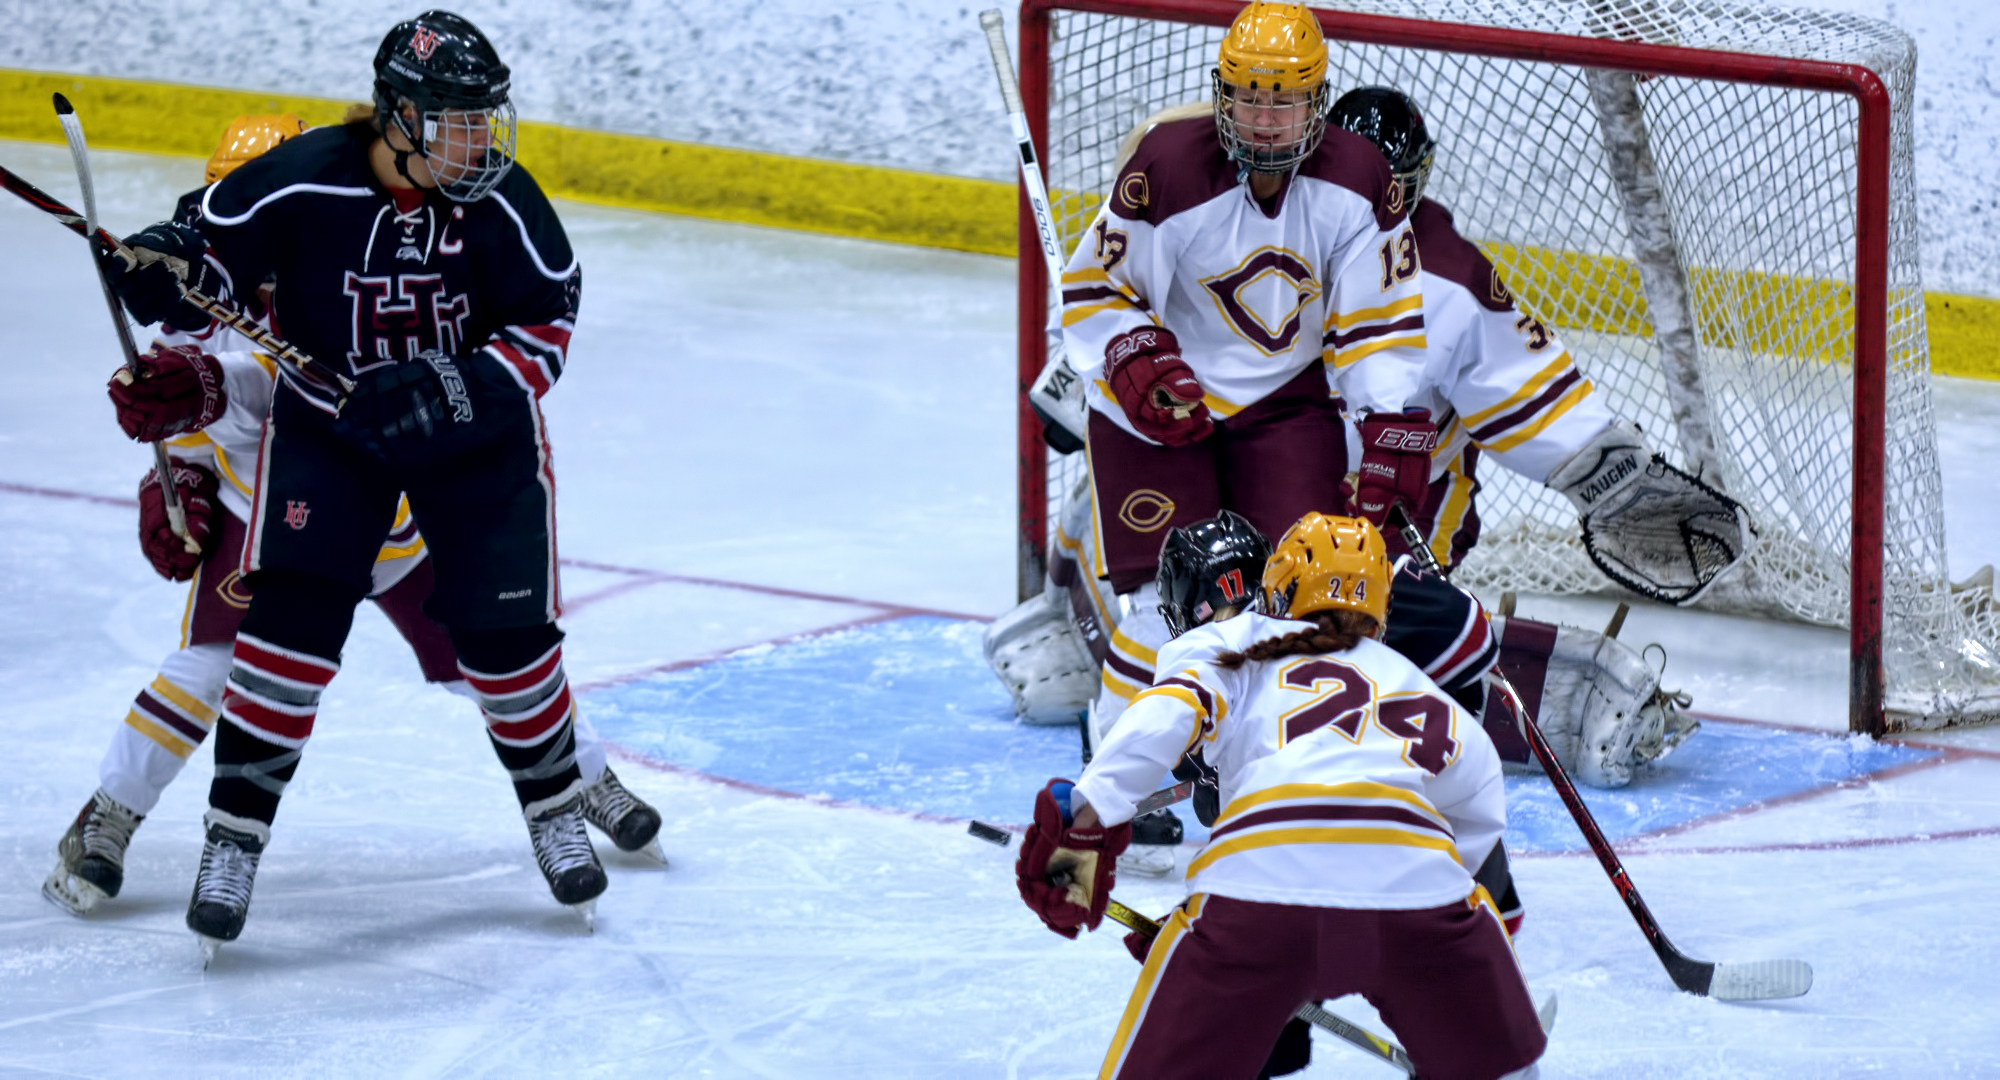 A shot gets fired at the Concordia goal during the Cobbers' series finale with Hamline.